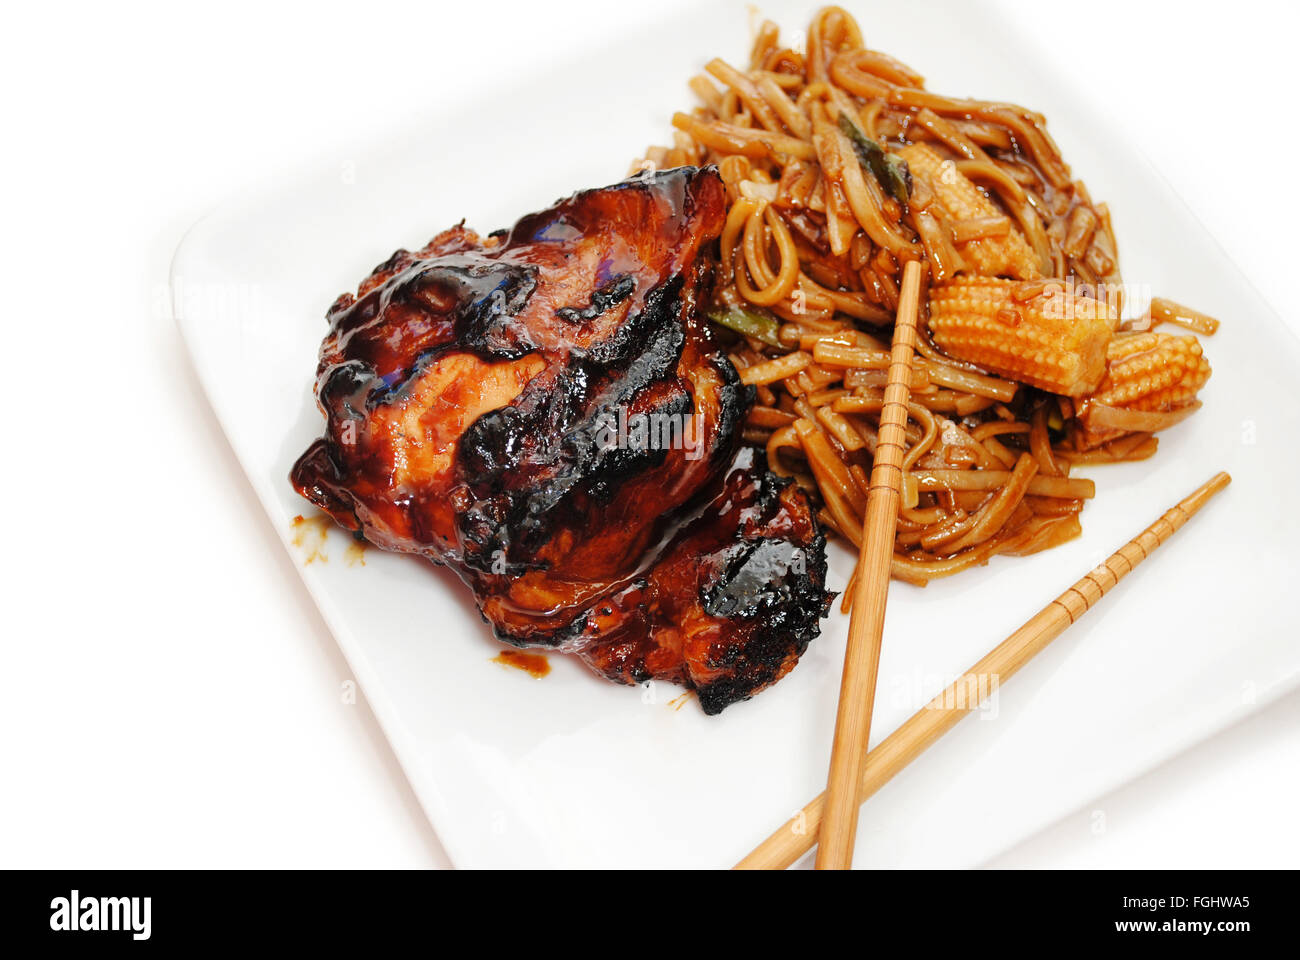 Chinese Vegetables and Noodles with Barbequed Chicken Stock Photo